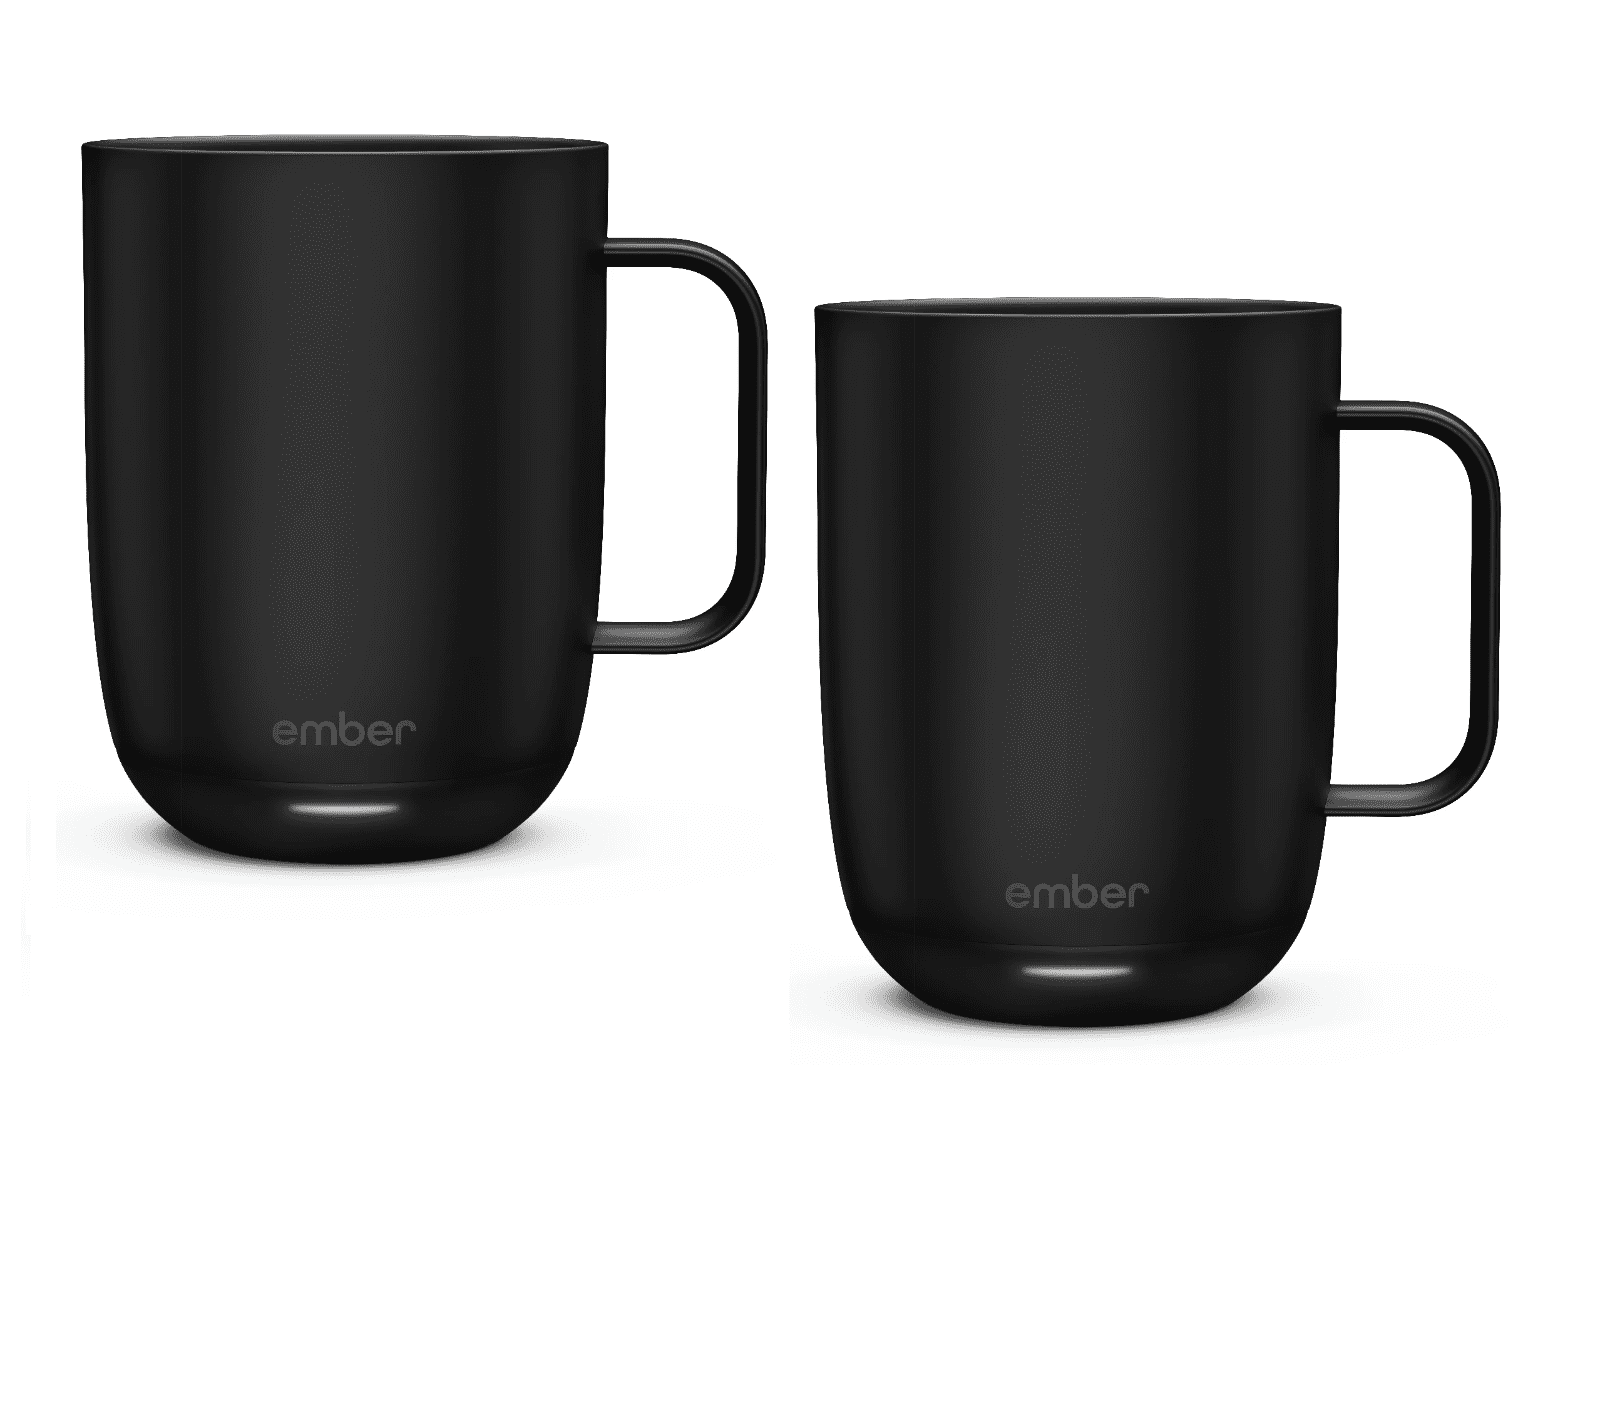 Ember Temperature Control Smart Mug 2, 14 Oz, App-Controlled Heated Coffee  Mug with 80 Min Battery L…See more Ember Temperature Control Smart Mug 2